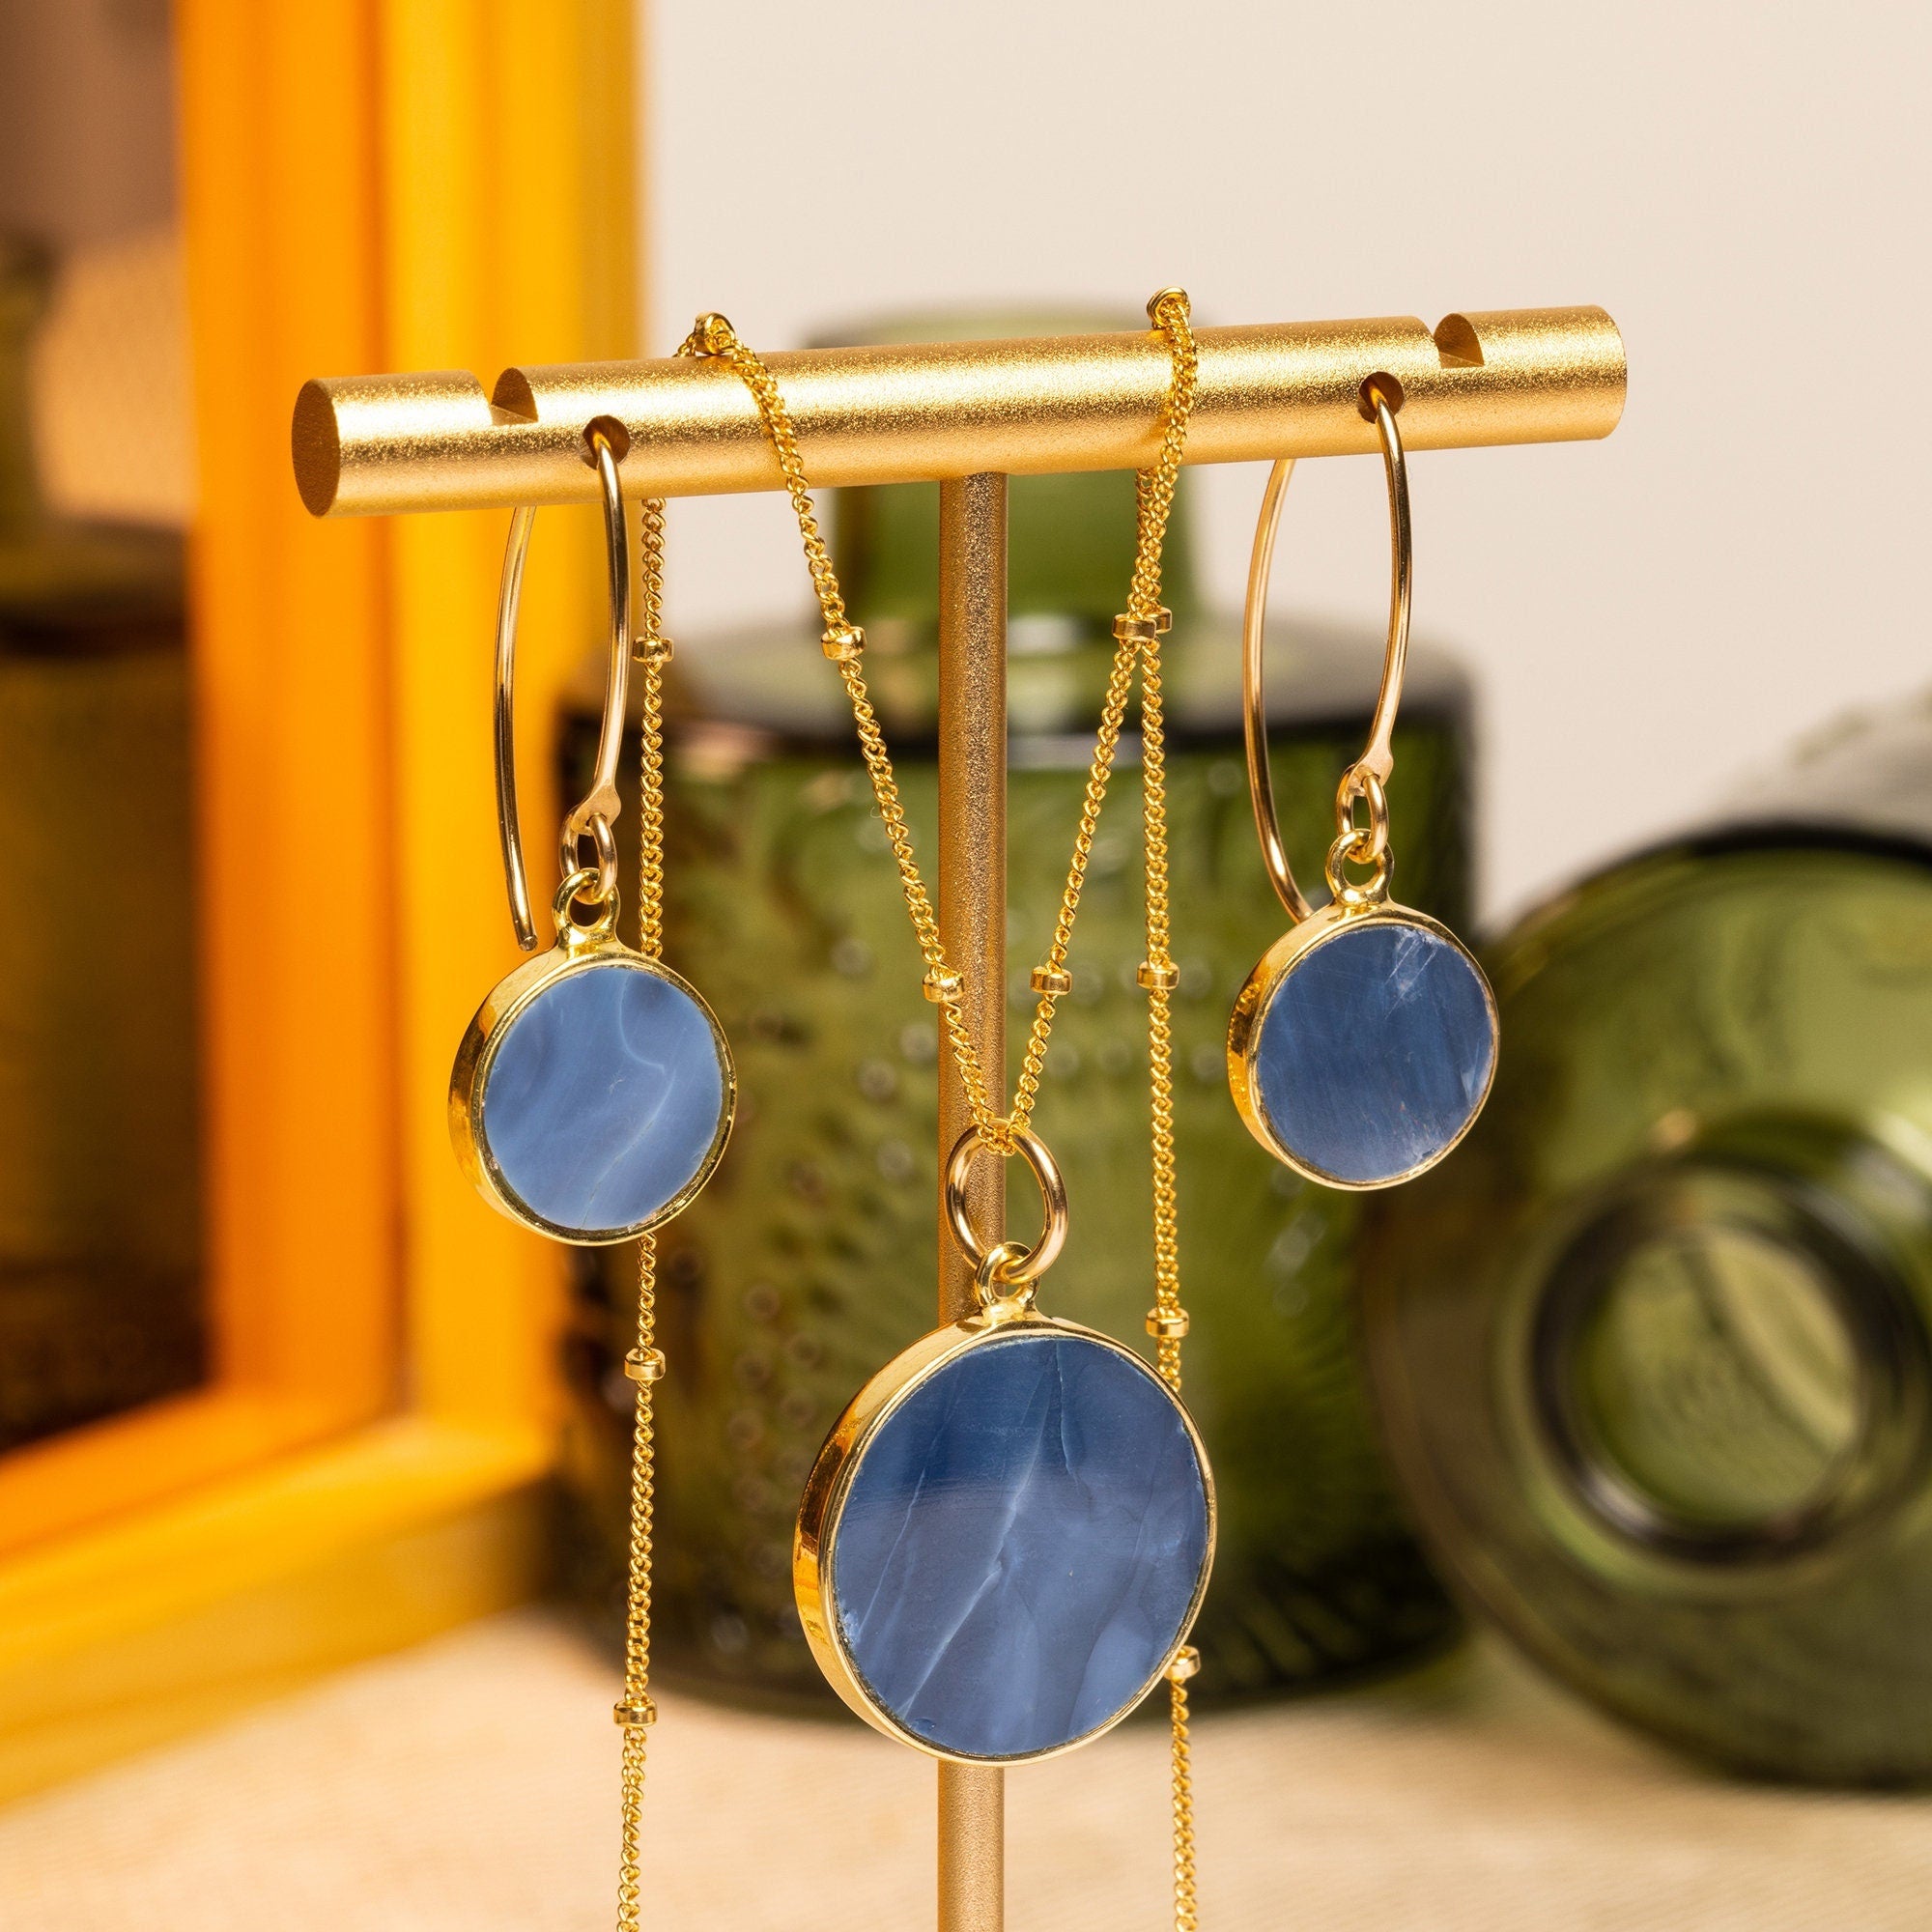 Blue Opal Disc Necklace and Earrings Gold Set (Satellite Chain) Necklace and Earrings Set Soul & Little Rose   